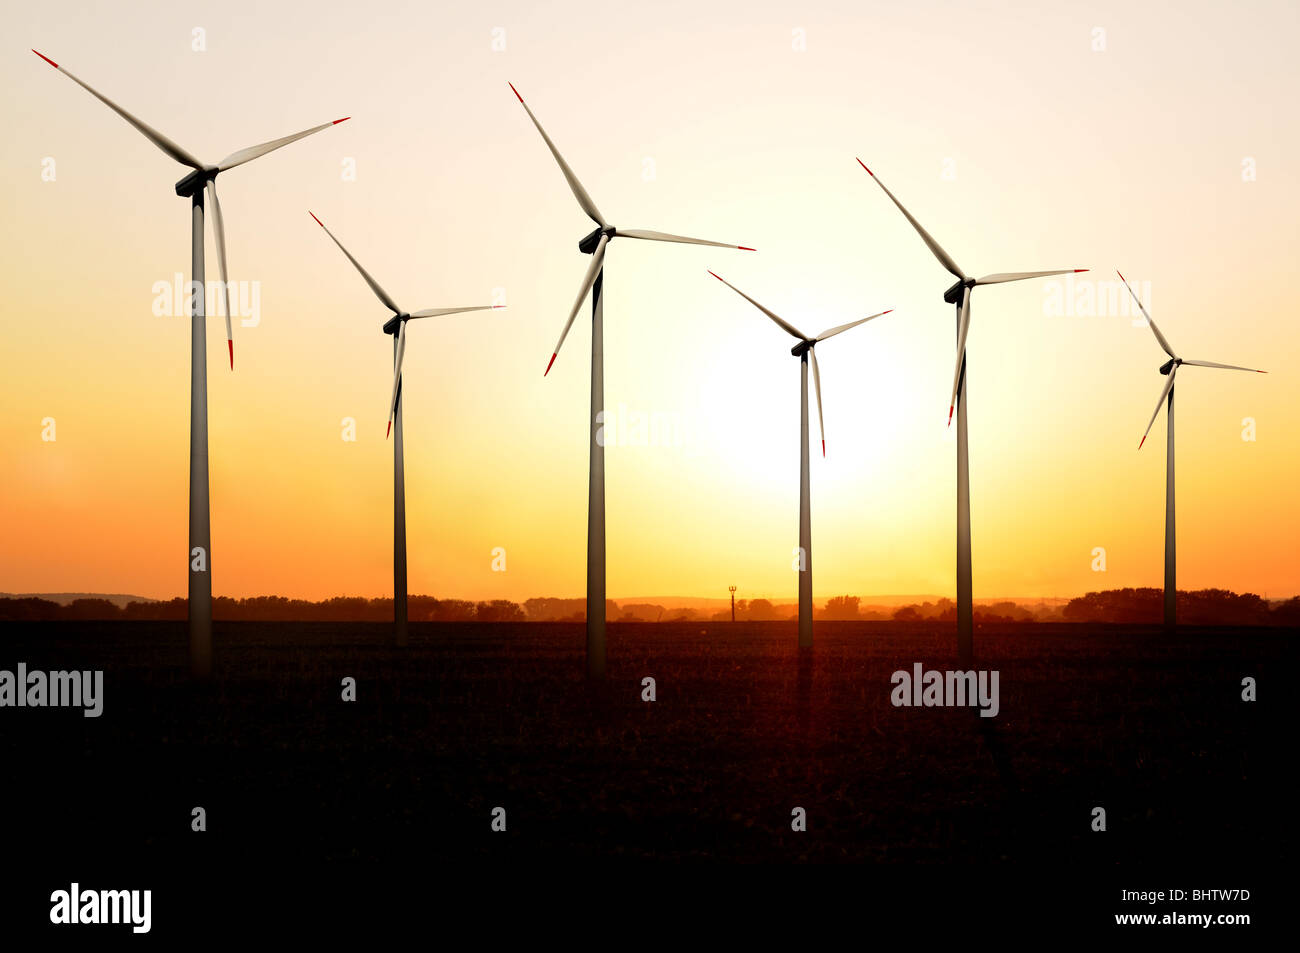 Turbines of a wind farm at sunset. Stock Photo